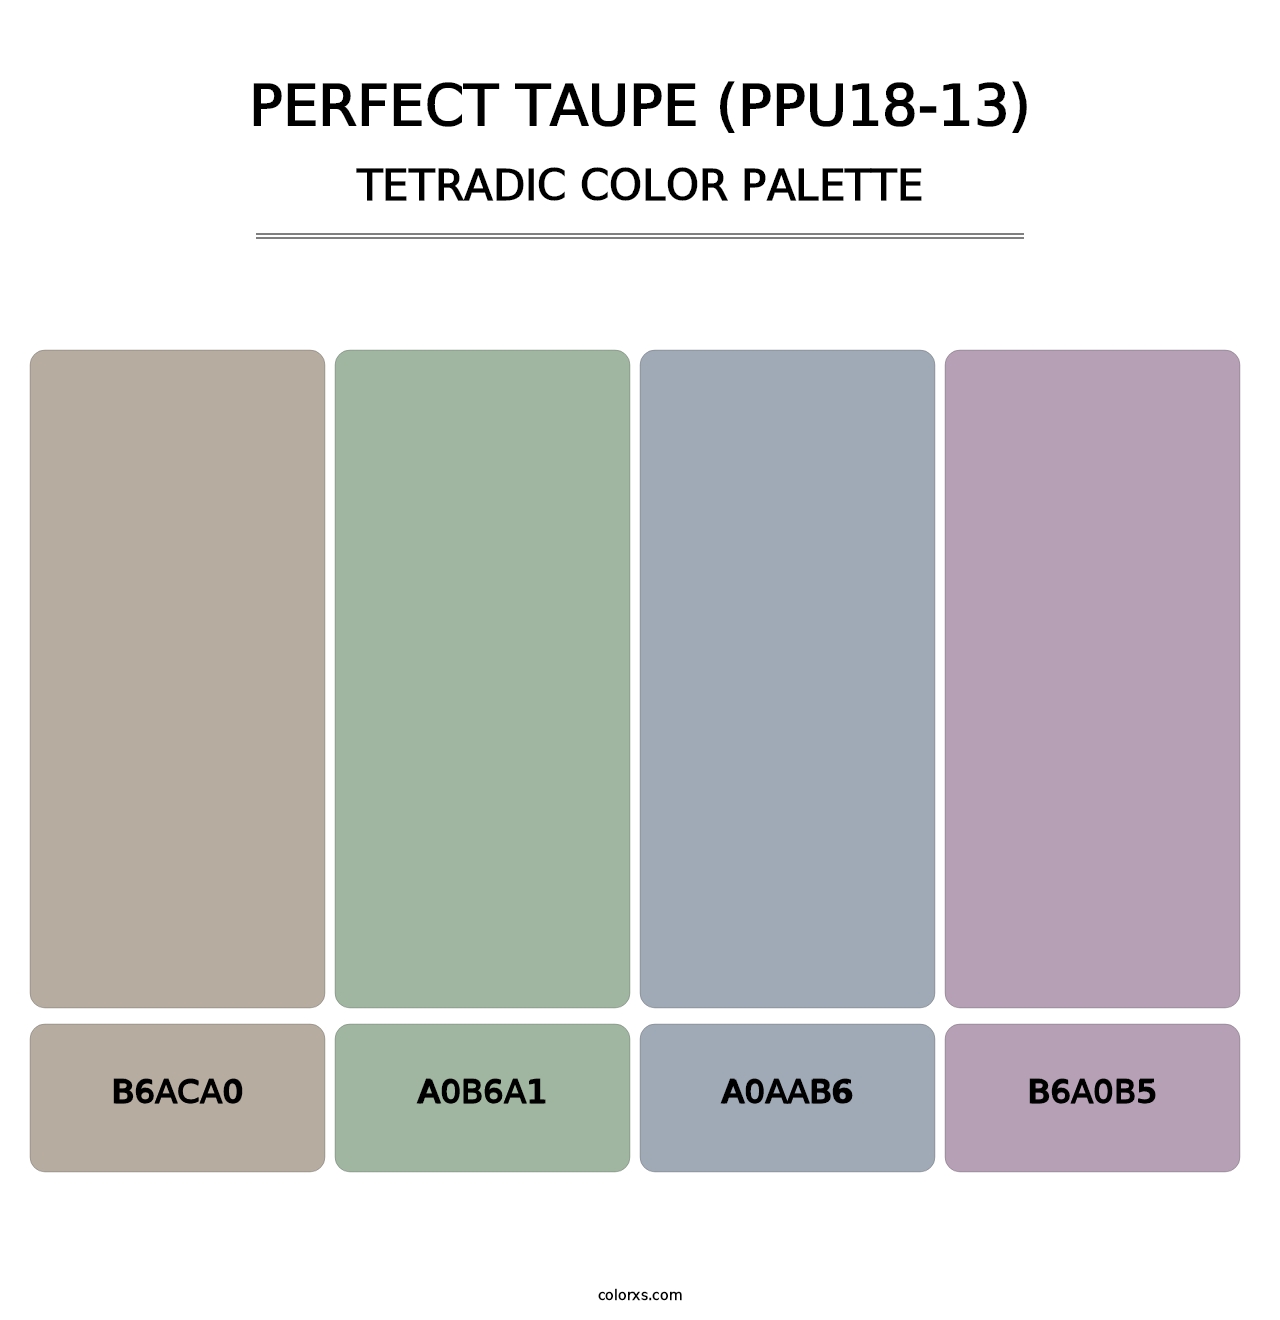 Perfect Taupe (PPU18-13) - Tetradic Color Palette